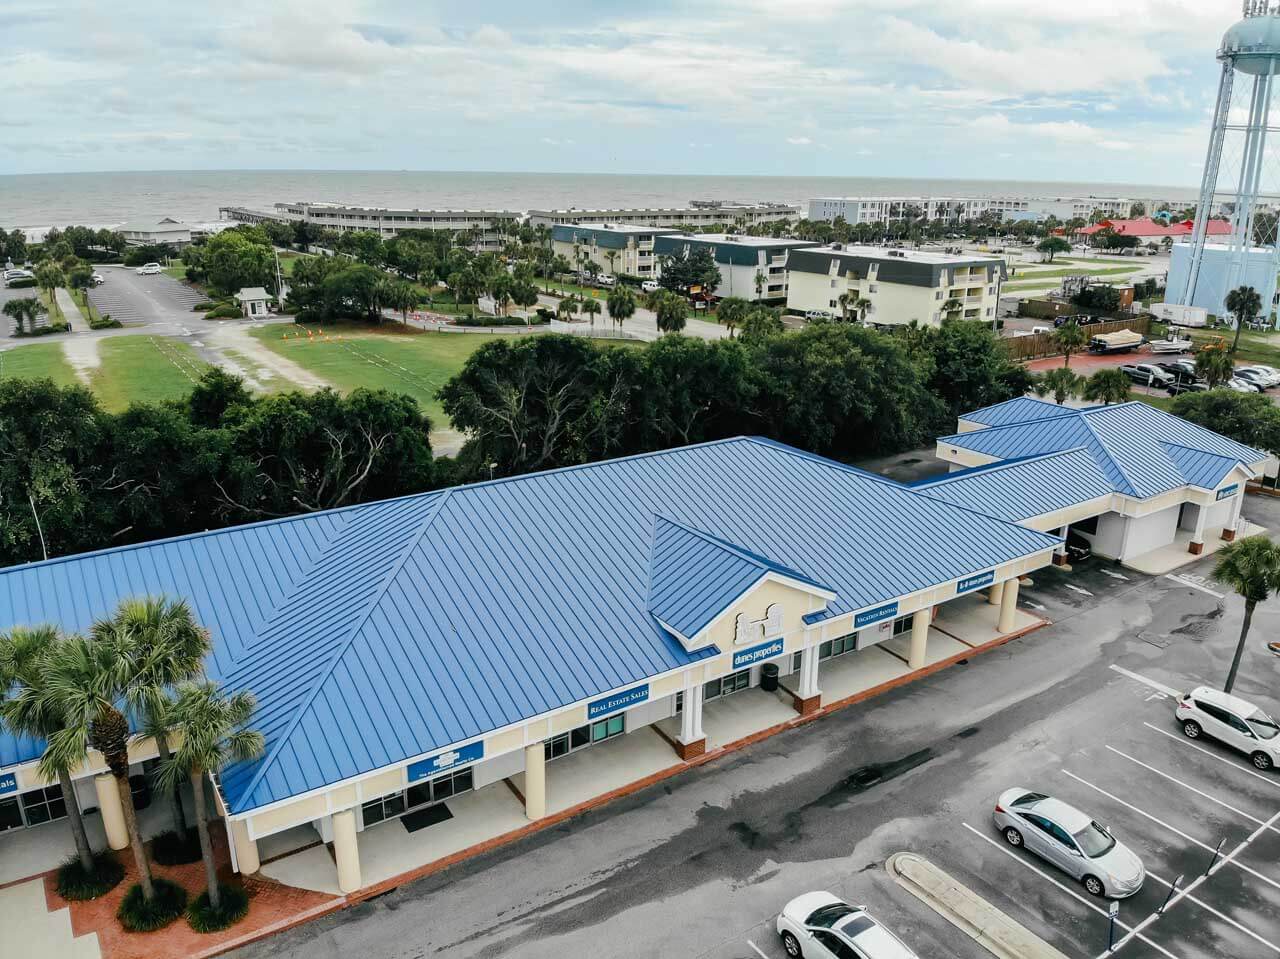 Aerial view of a painted blue metal roof on a shopping center at Isle of Palms beach